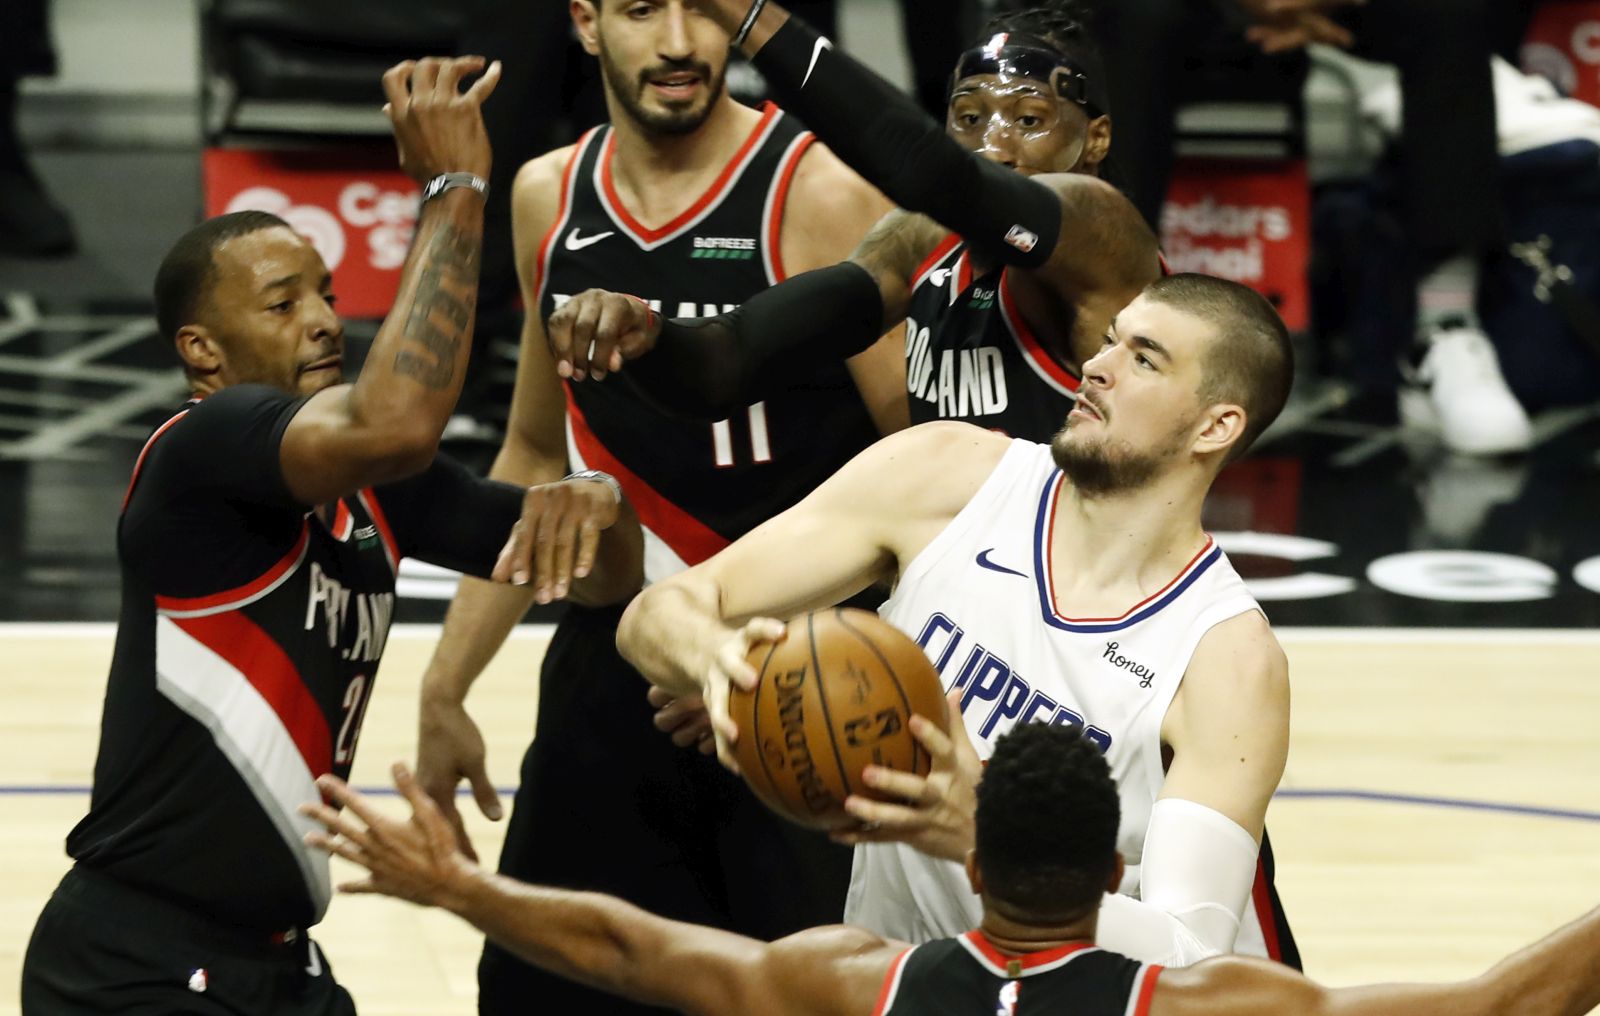 epa09119710 LA Clippers center Ivica Zubac (R) in action during the NBA basketball game between Portland Trail Blazers and Los Angeles Clippers at the Staples Center in Los Angeles, California, USA, 06 April 2021.  EPA/ETIENNE LAURENT SHUTTERSTOCK OUT